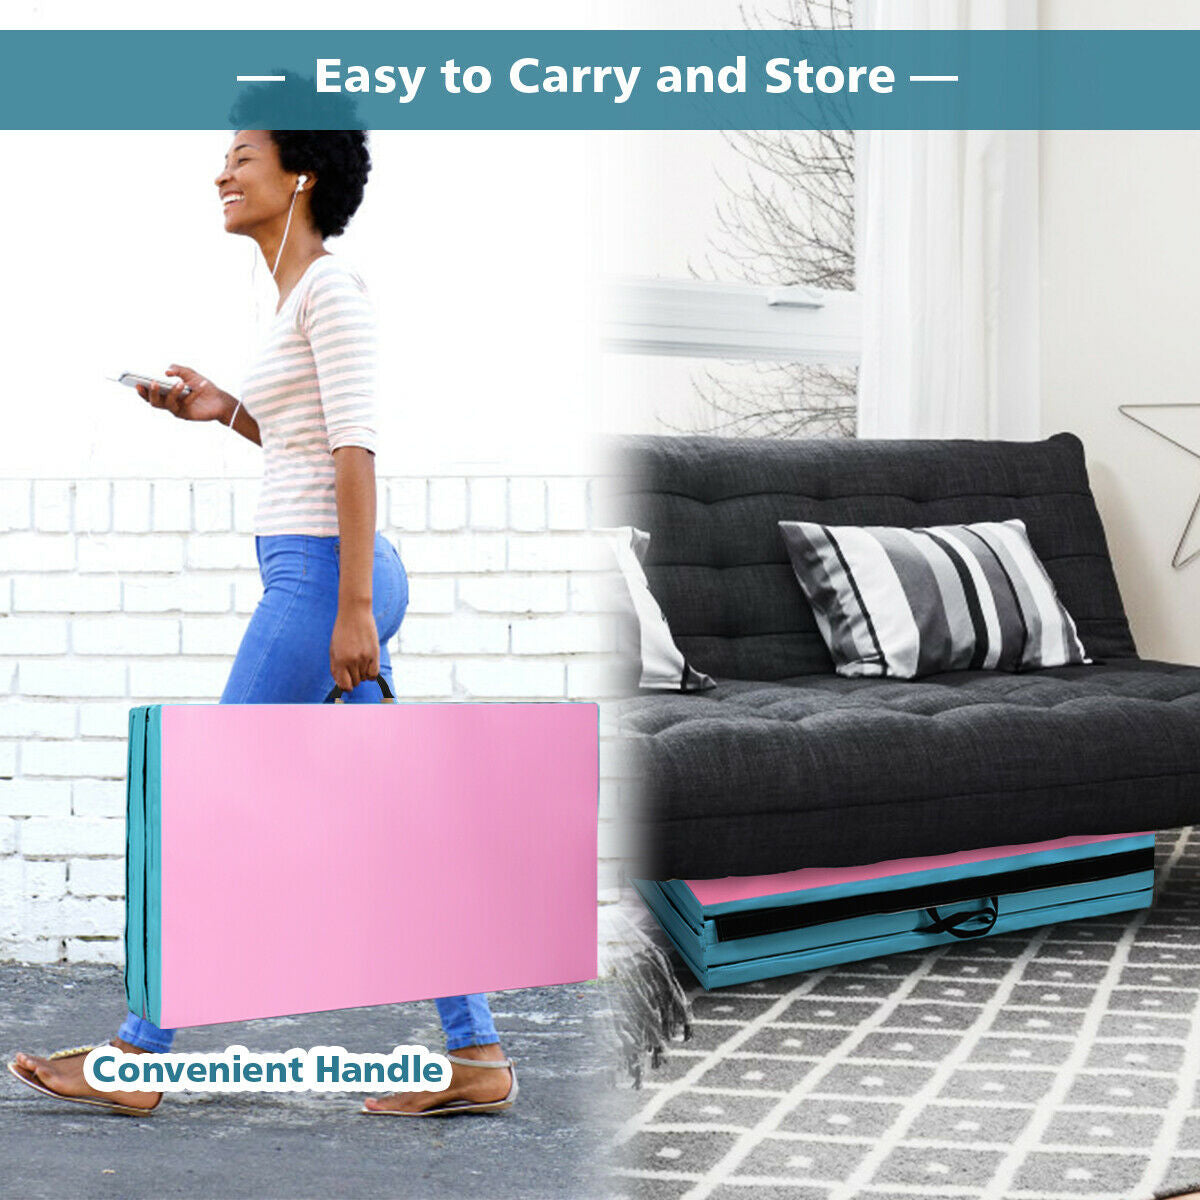 <strong>Compact Storage Solution:</strong> Effortlessly fold this gymnastic mat into four quarters for convenient carrying and storage. Its space-saving design allows it to fit into compact spaces with ease, making storage a breeze.